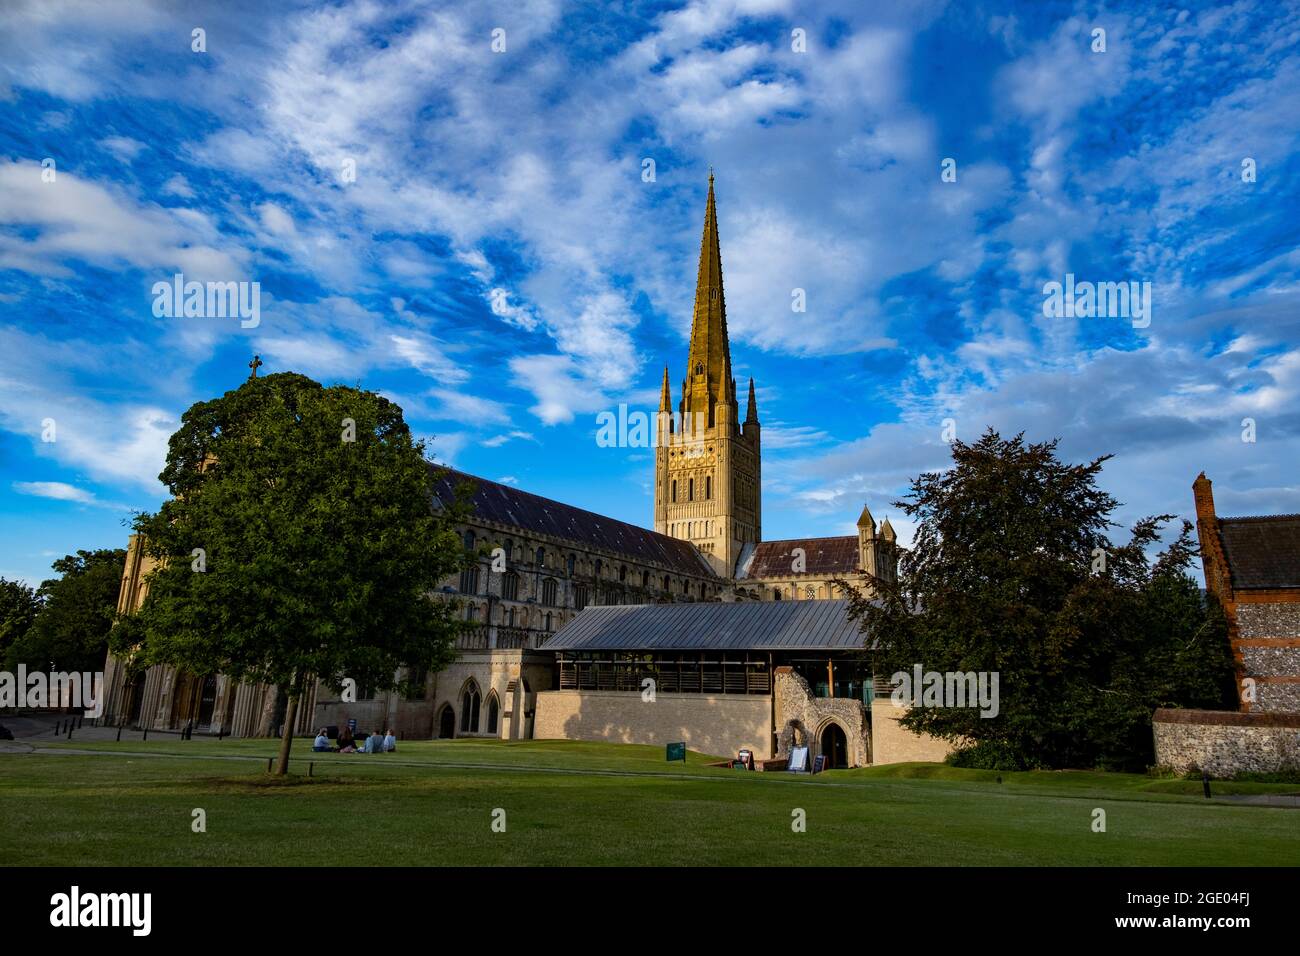 Beautiful Norwich Cathedral prominent with its 315 foot Spire, the second tallest in England. Stock Photo